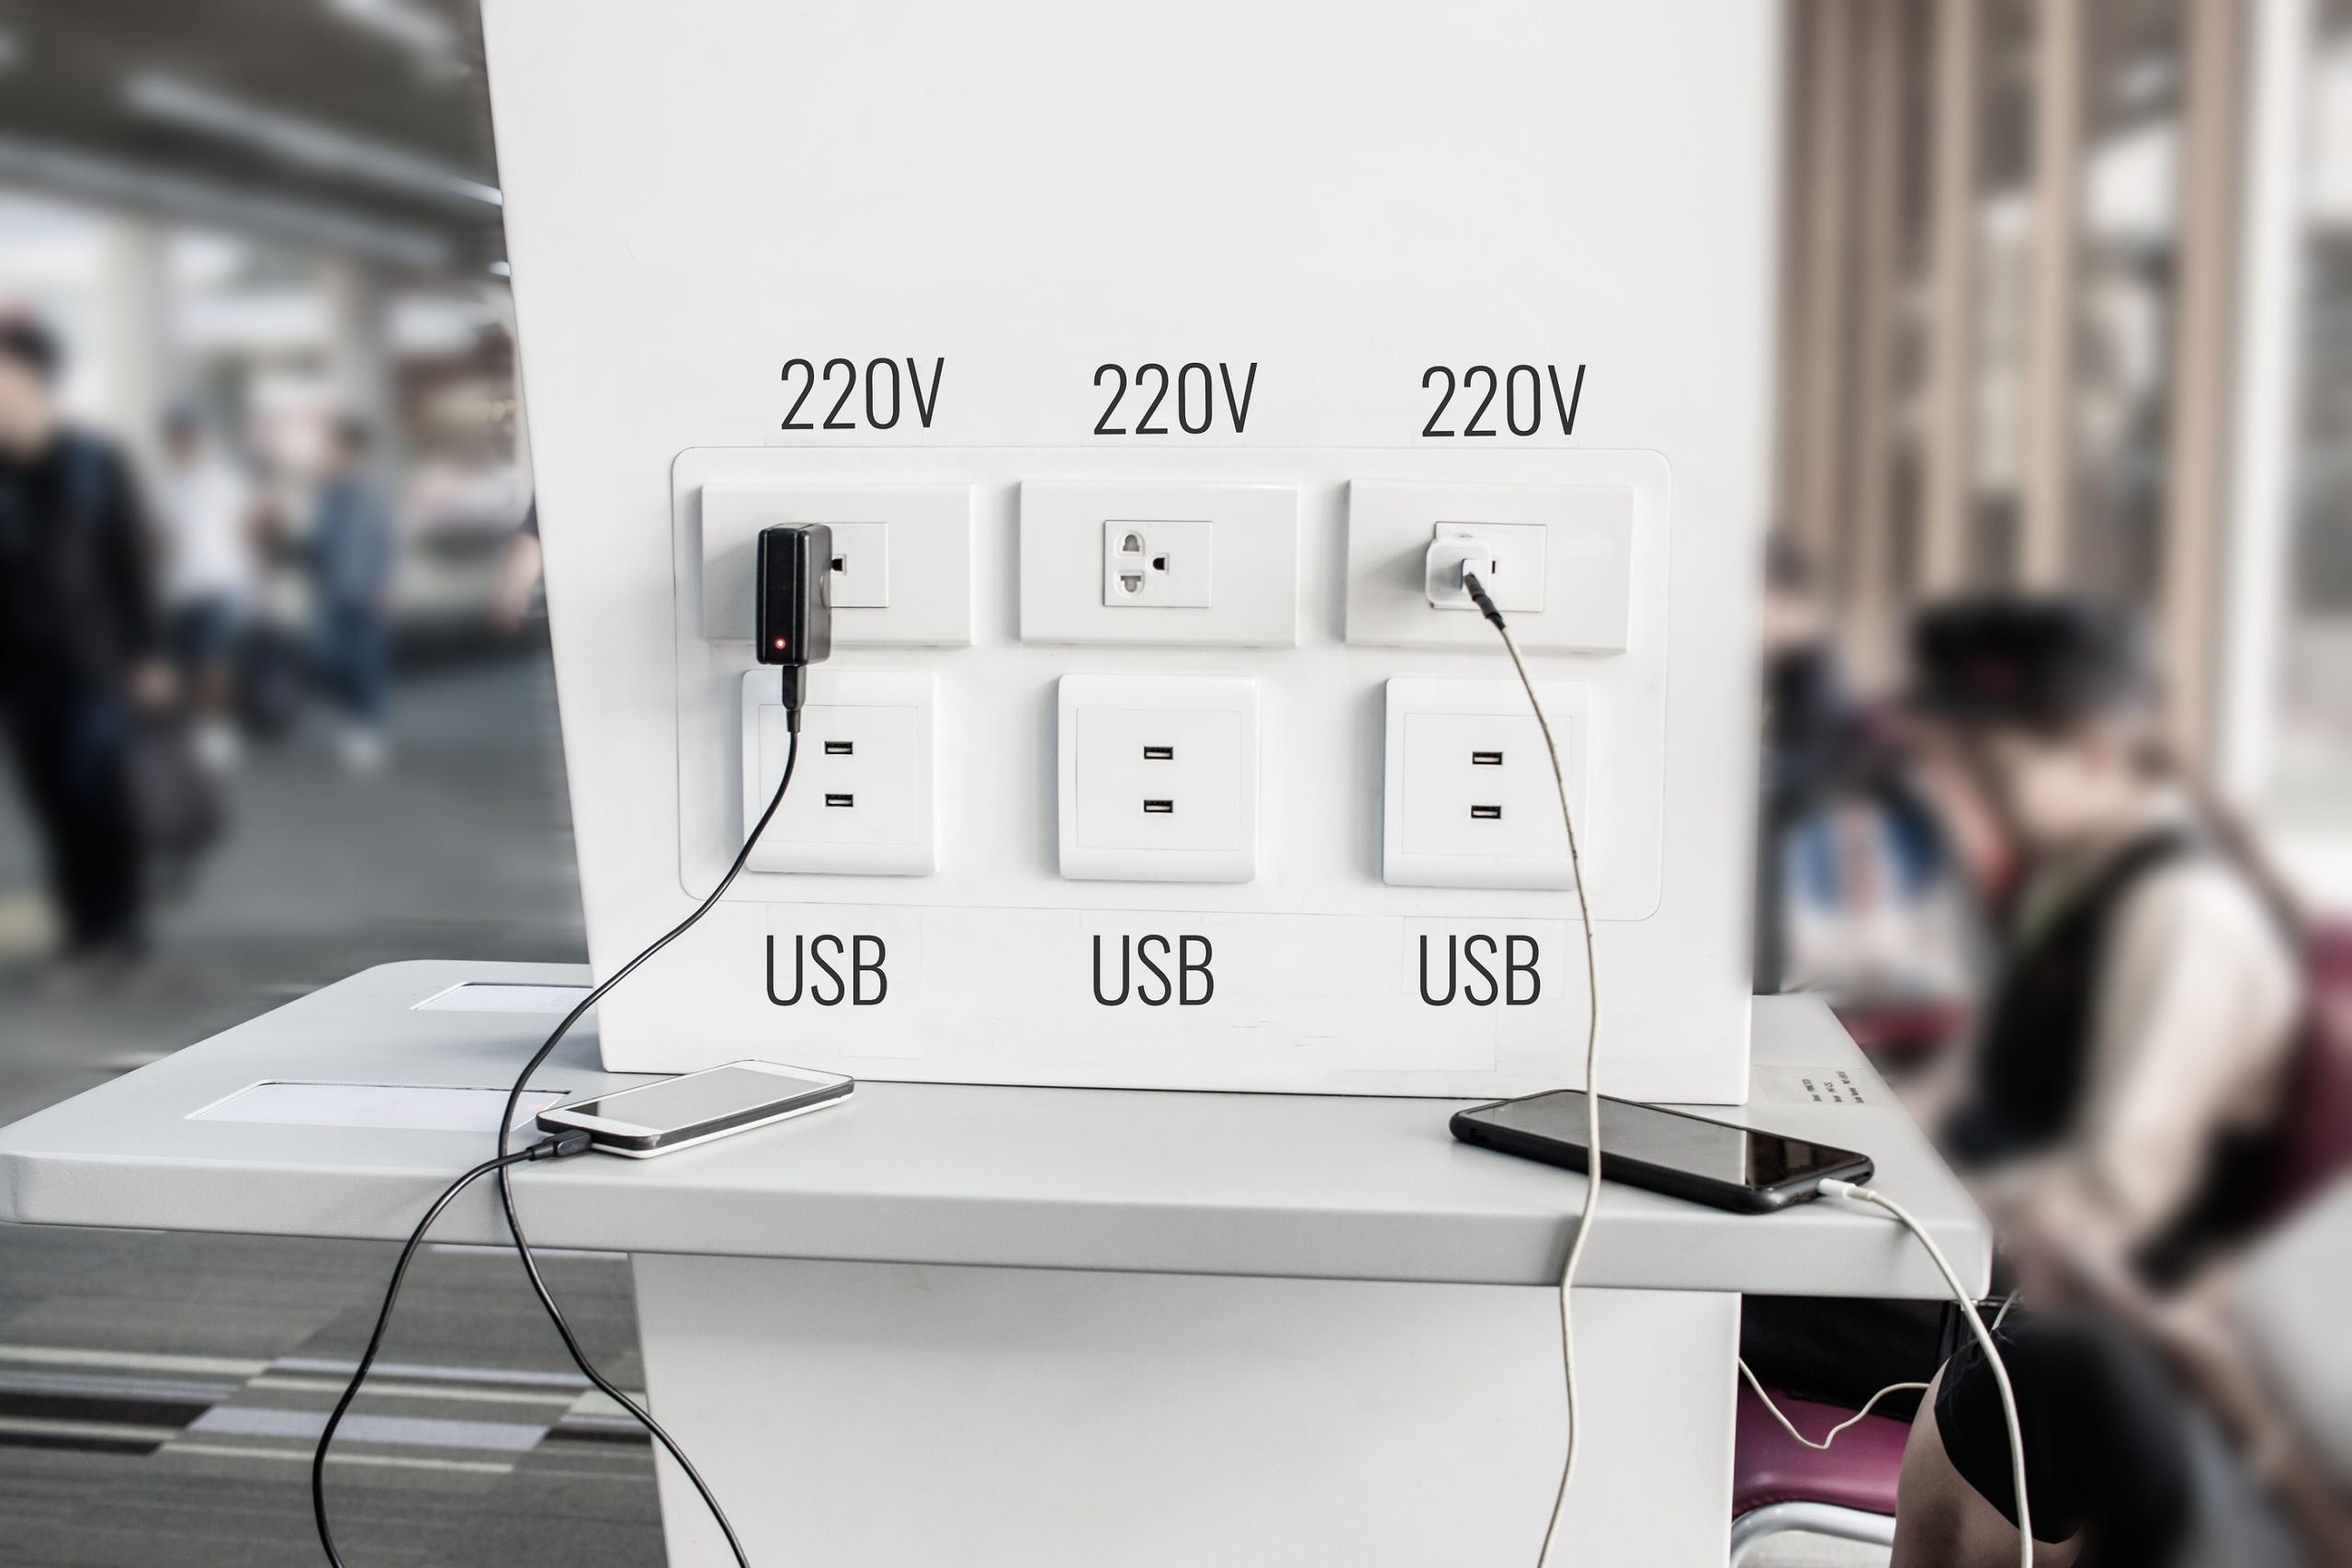 Public USB Charging Stations: Are They Safe? What to Look Out For